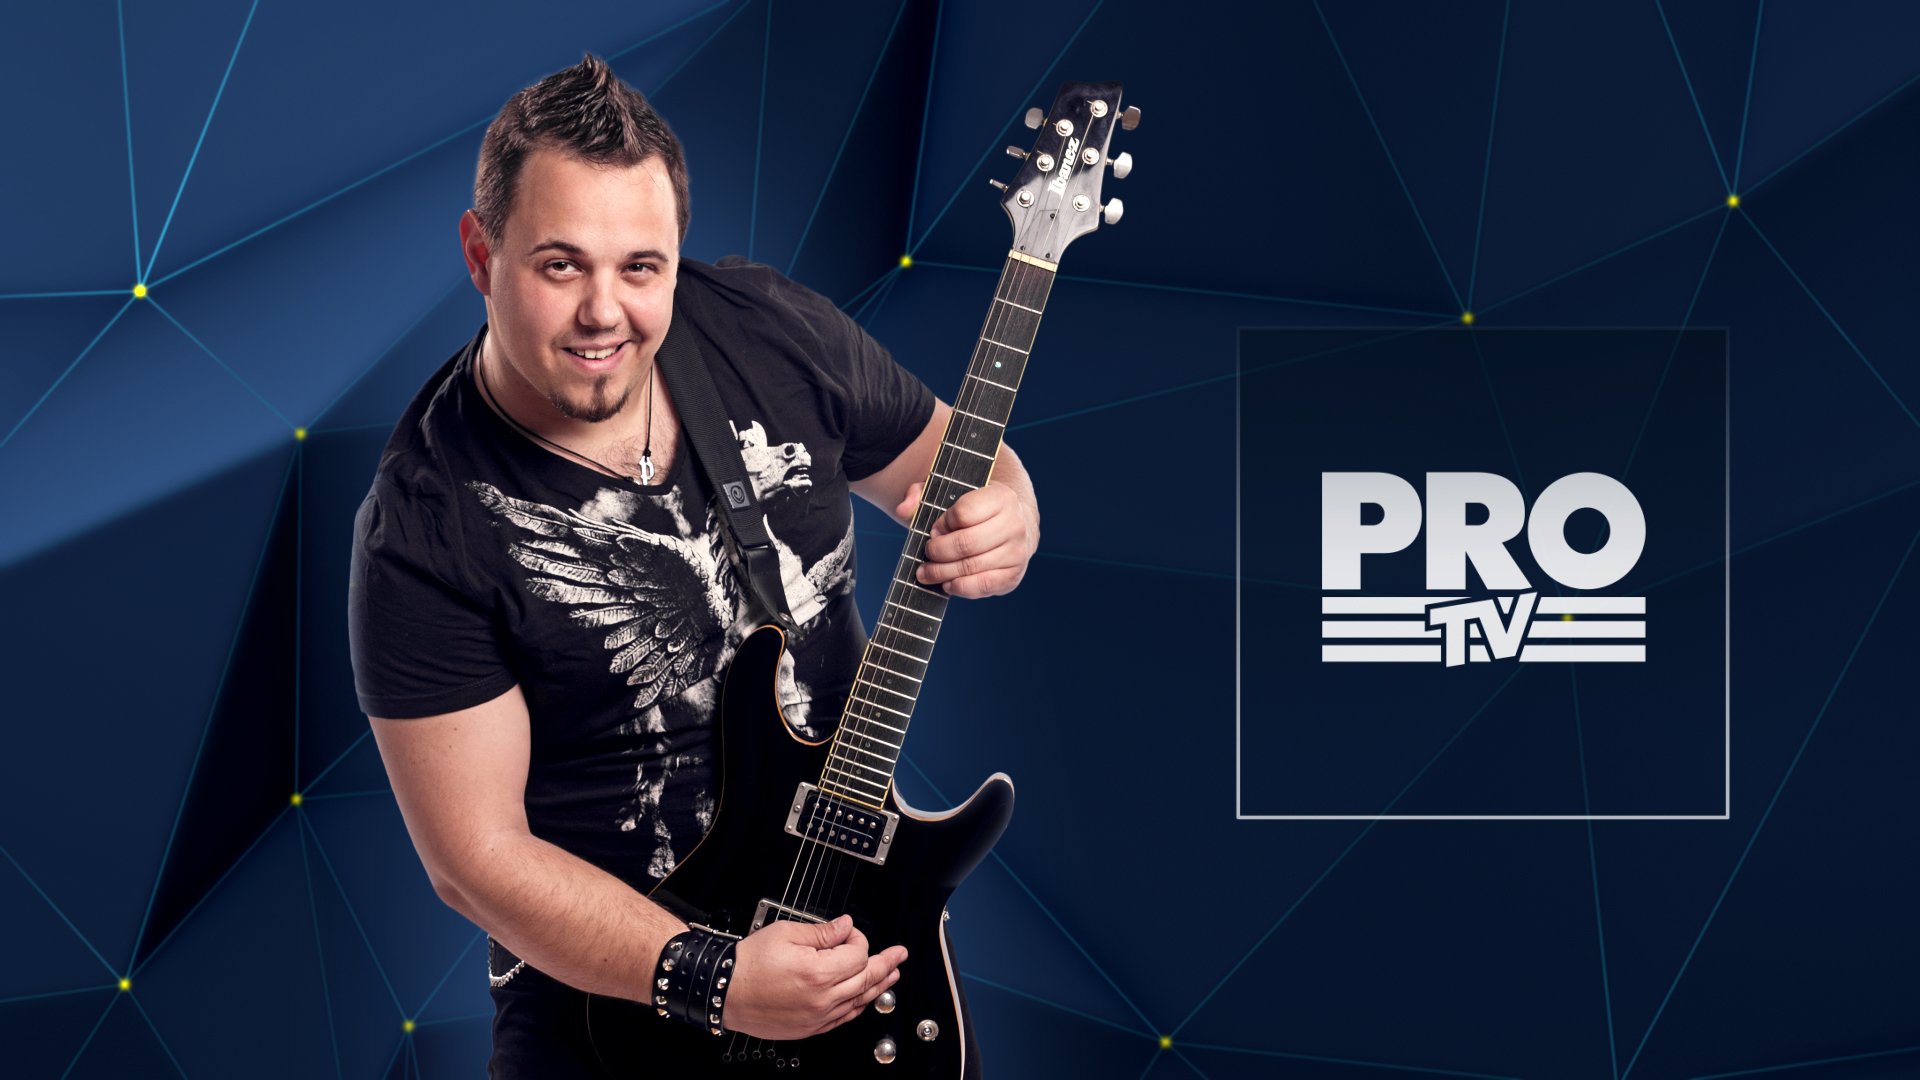 PRO TV and Ovidiu Anton join forces to bring Eurovision 2016 to Romania